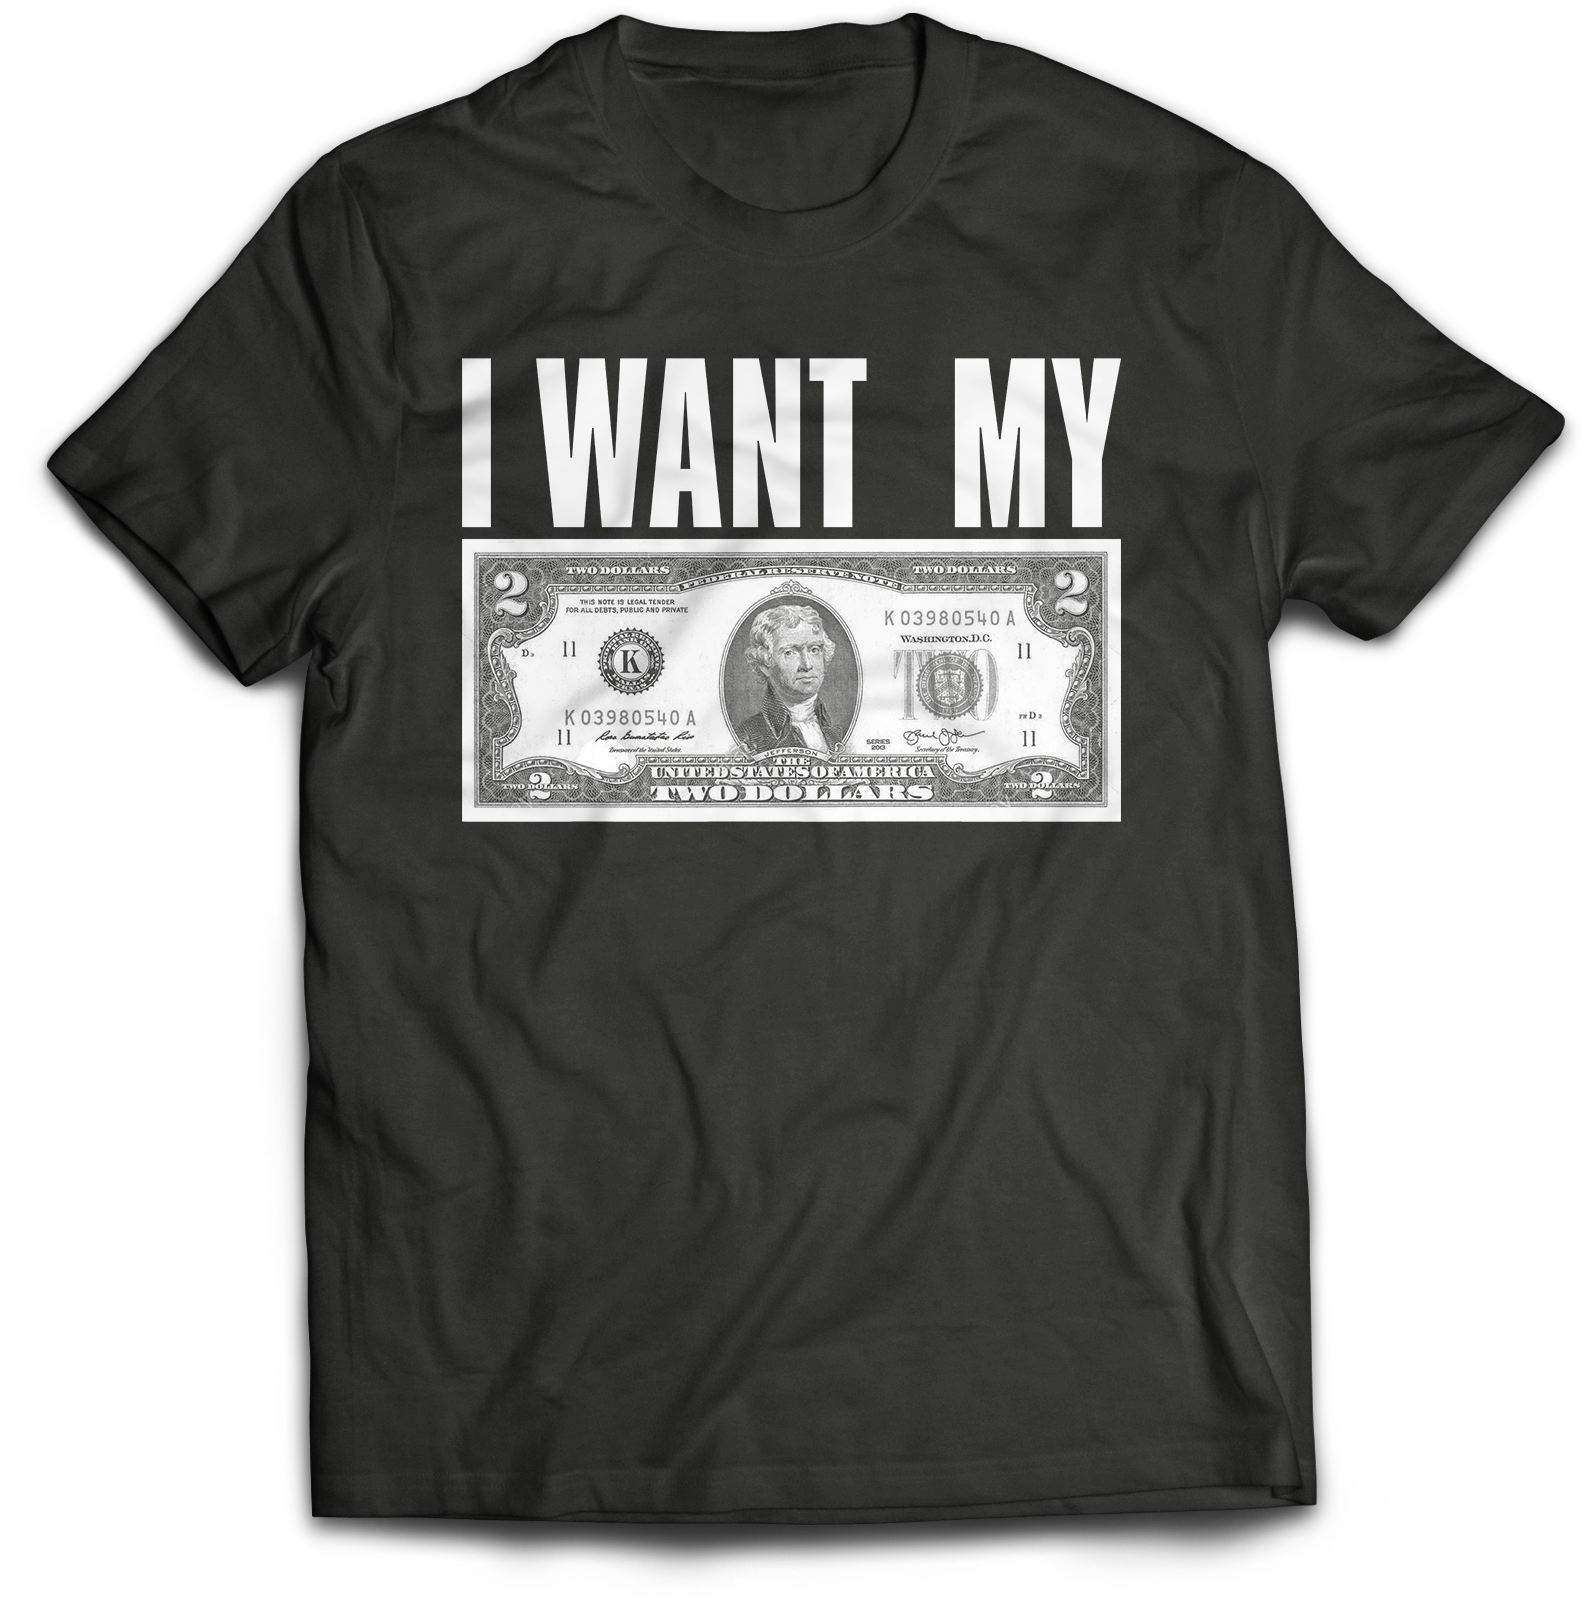 BETTER OFF DEAD "I WANT MY TWO DOLLARS" BLACK T-SHIRT